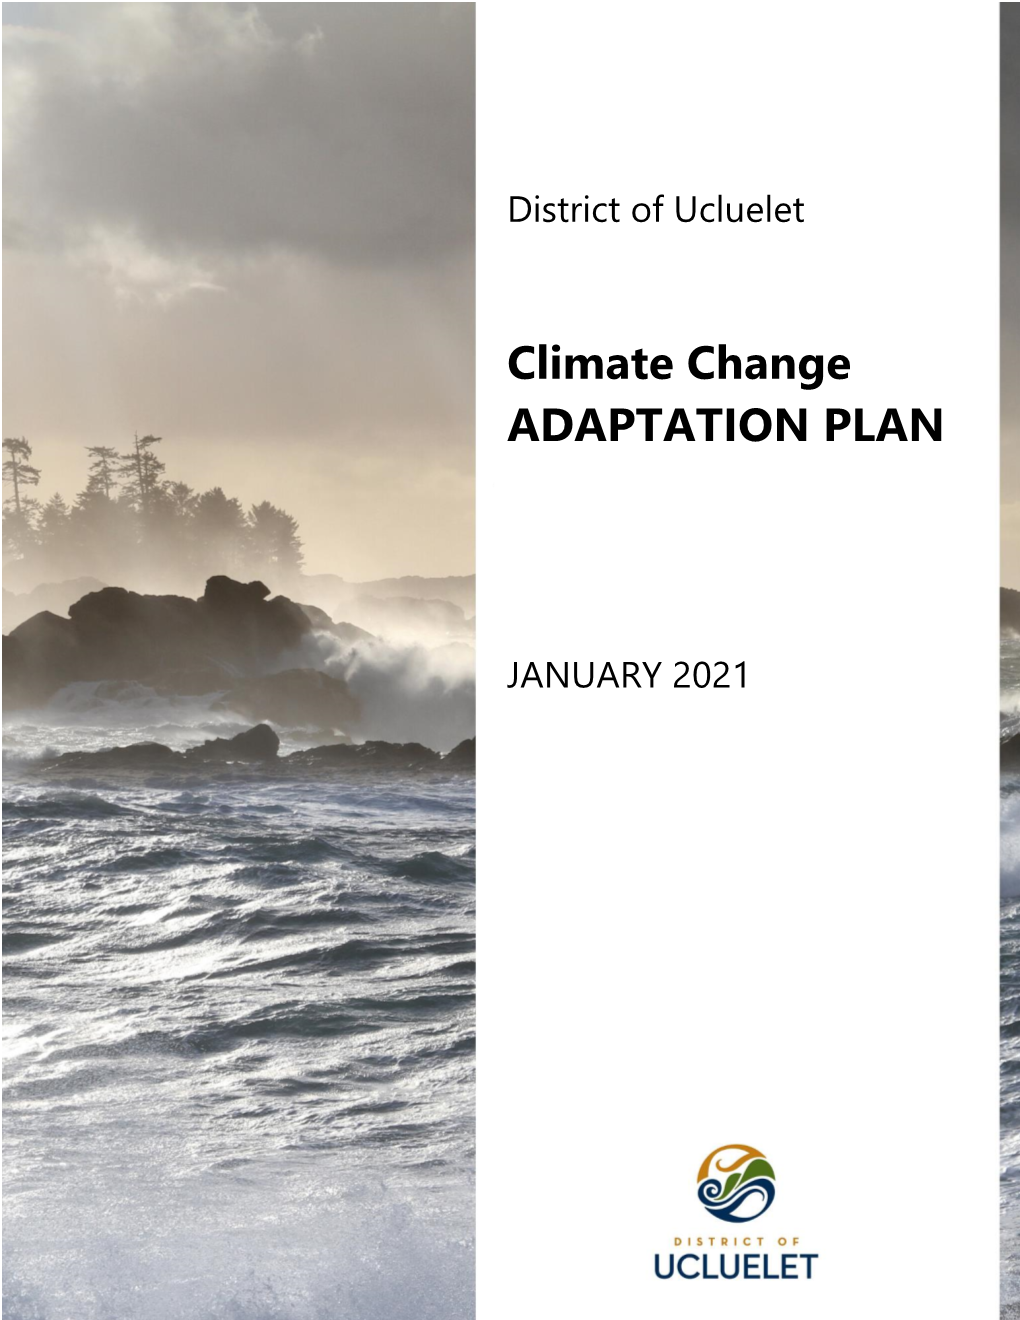 District of Ucluelet Climate Change Adaptation Plan